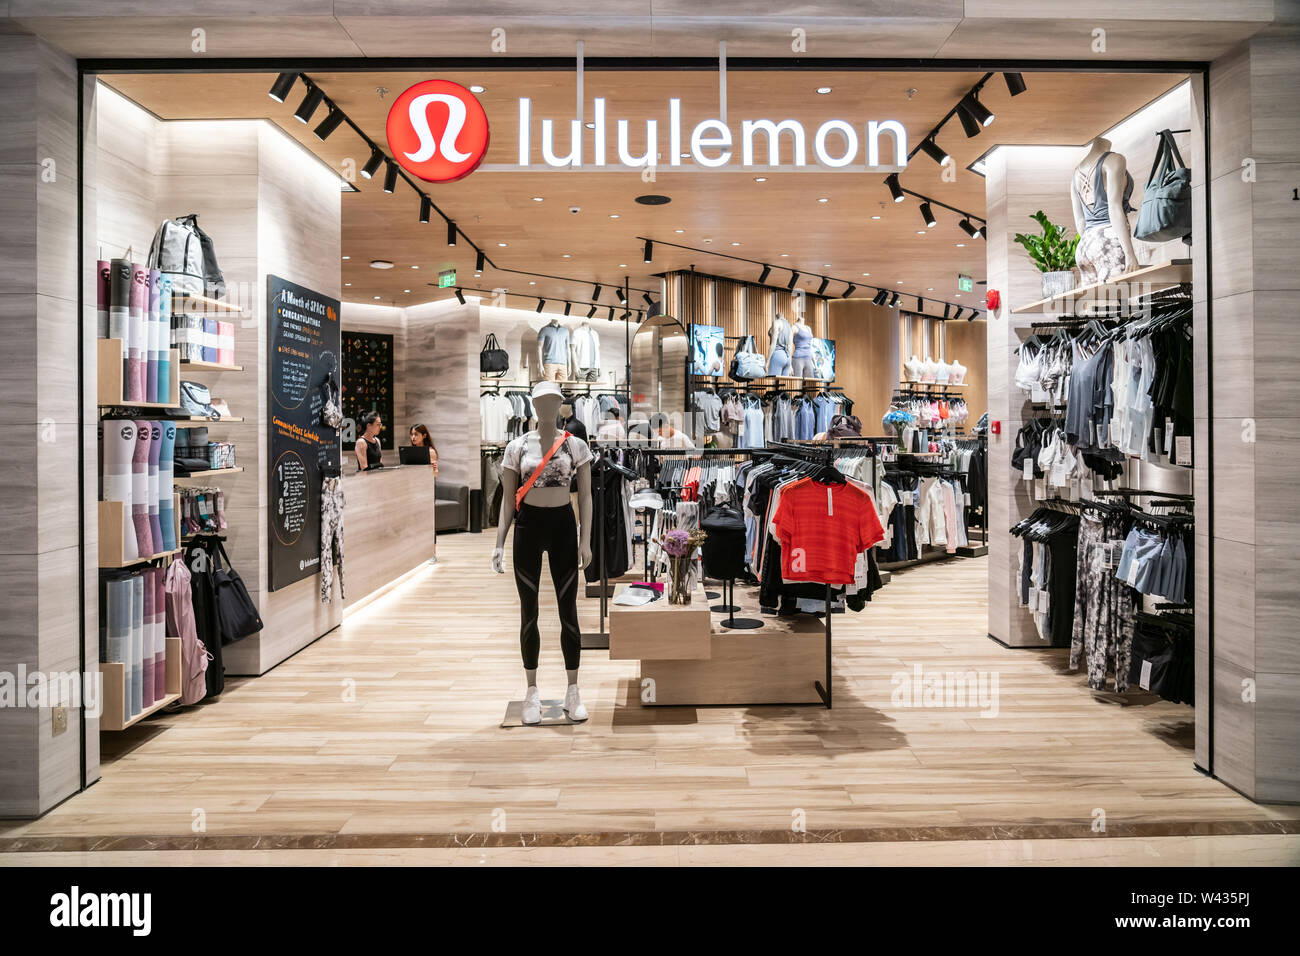 70+ Lululemon Stock Photos, Pictures & Royalty-Free Images